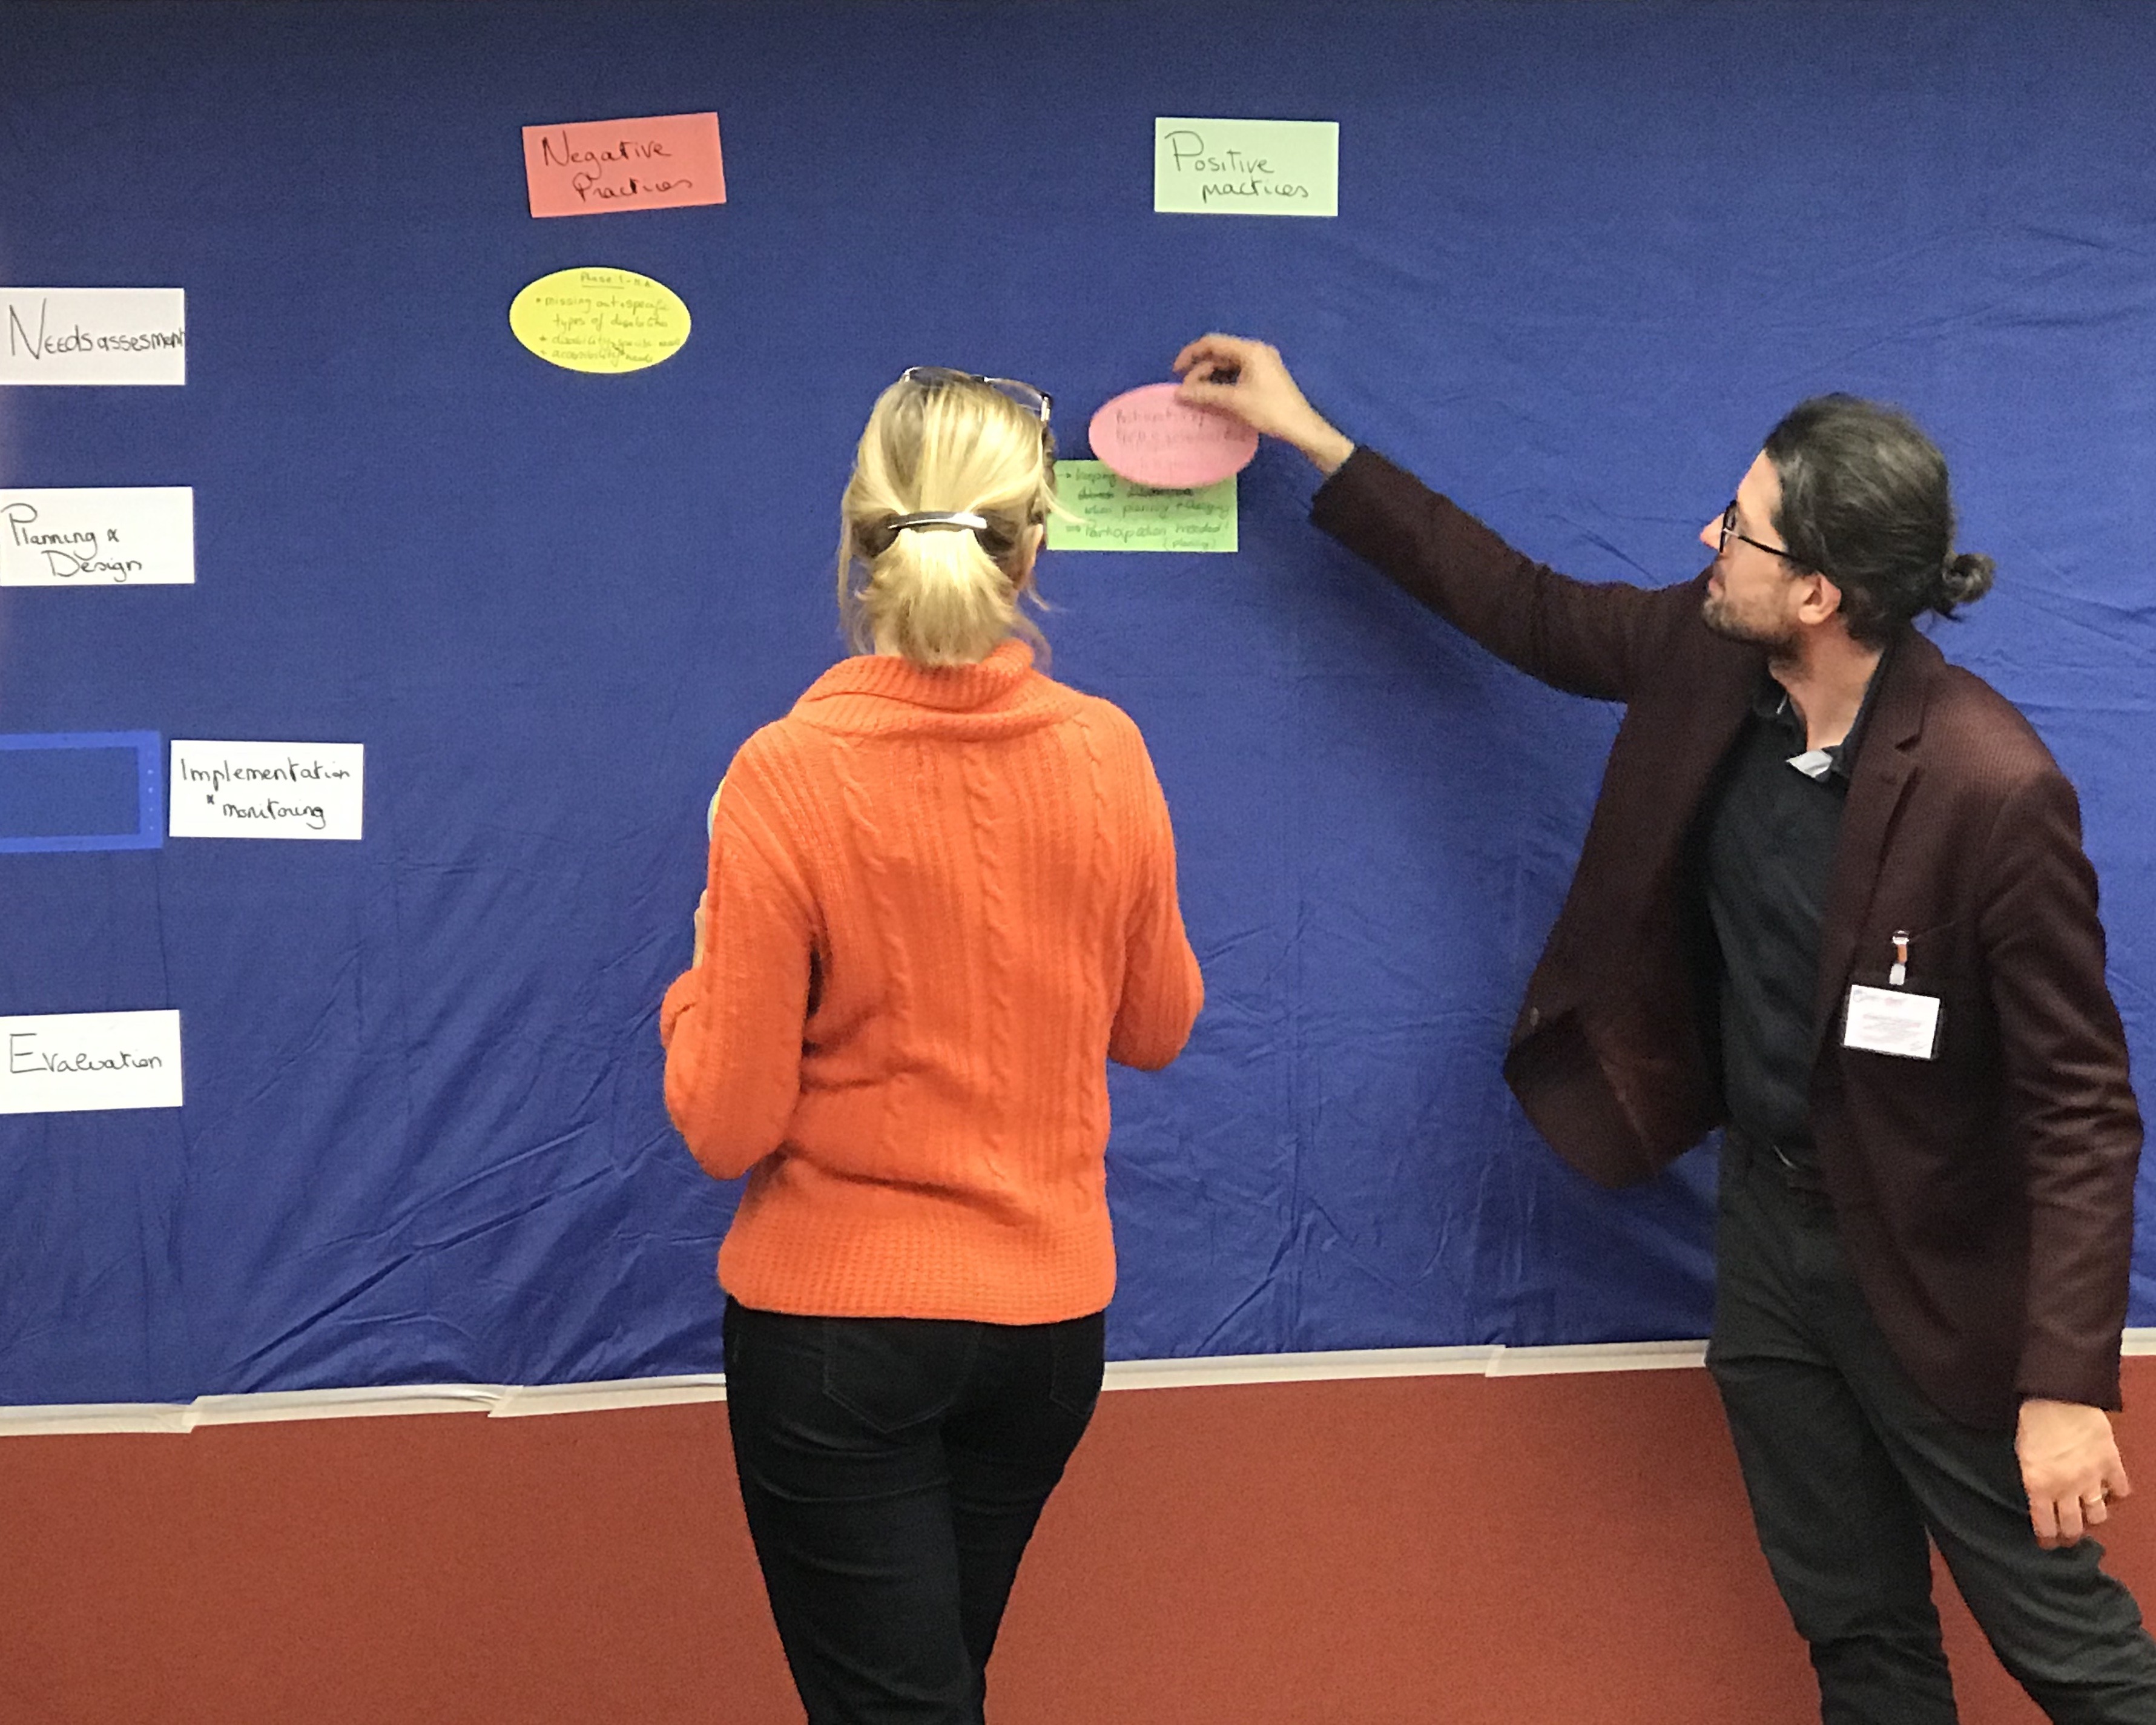 Project coordinator stands with a participant in front of a flipchart